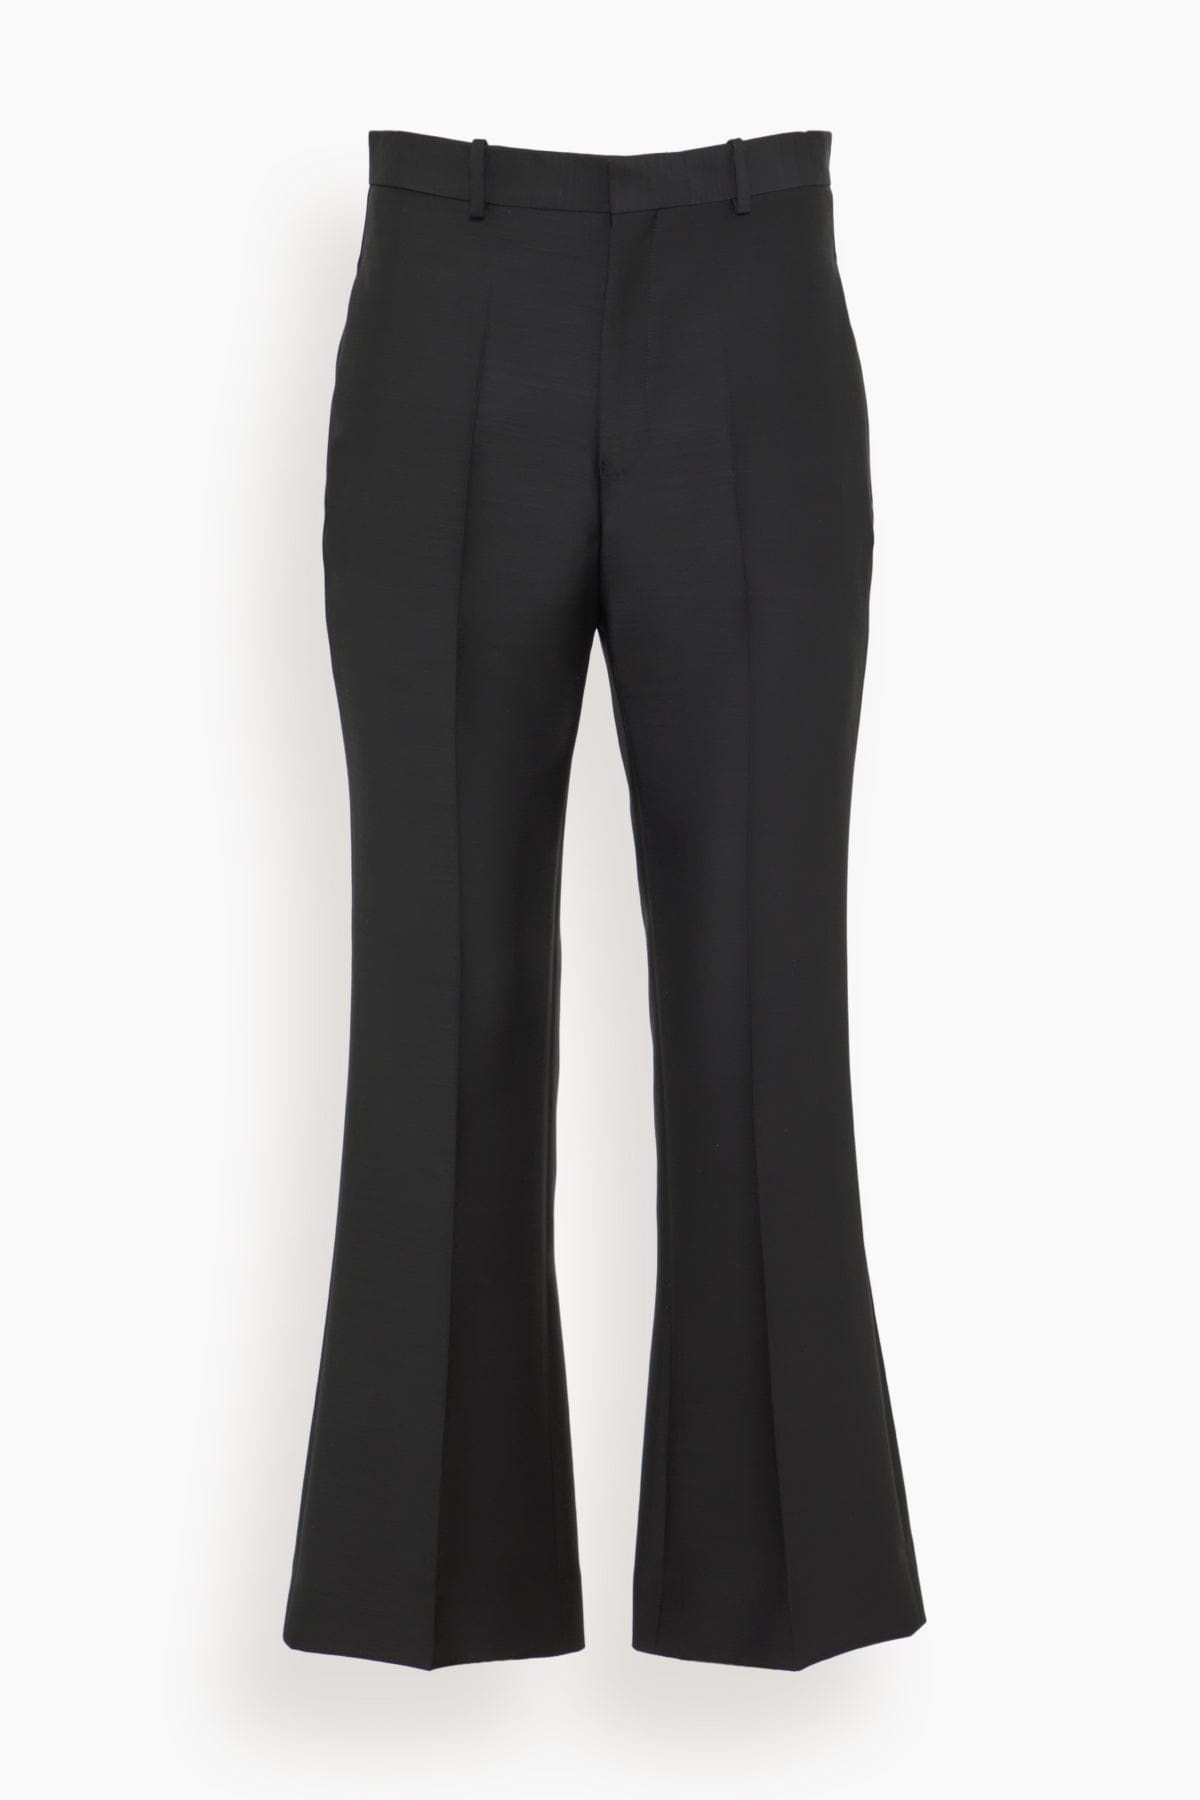 Credo Cropped Bootcut Woven Trouser in Black - 1